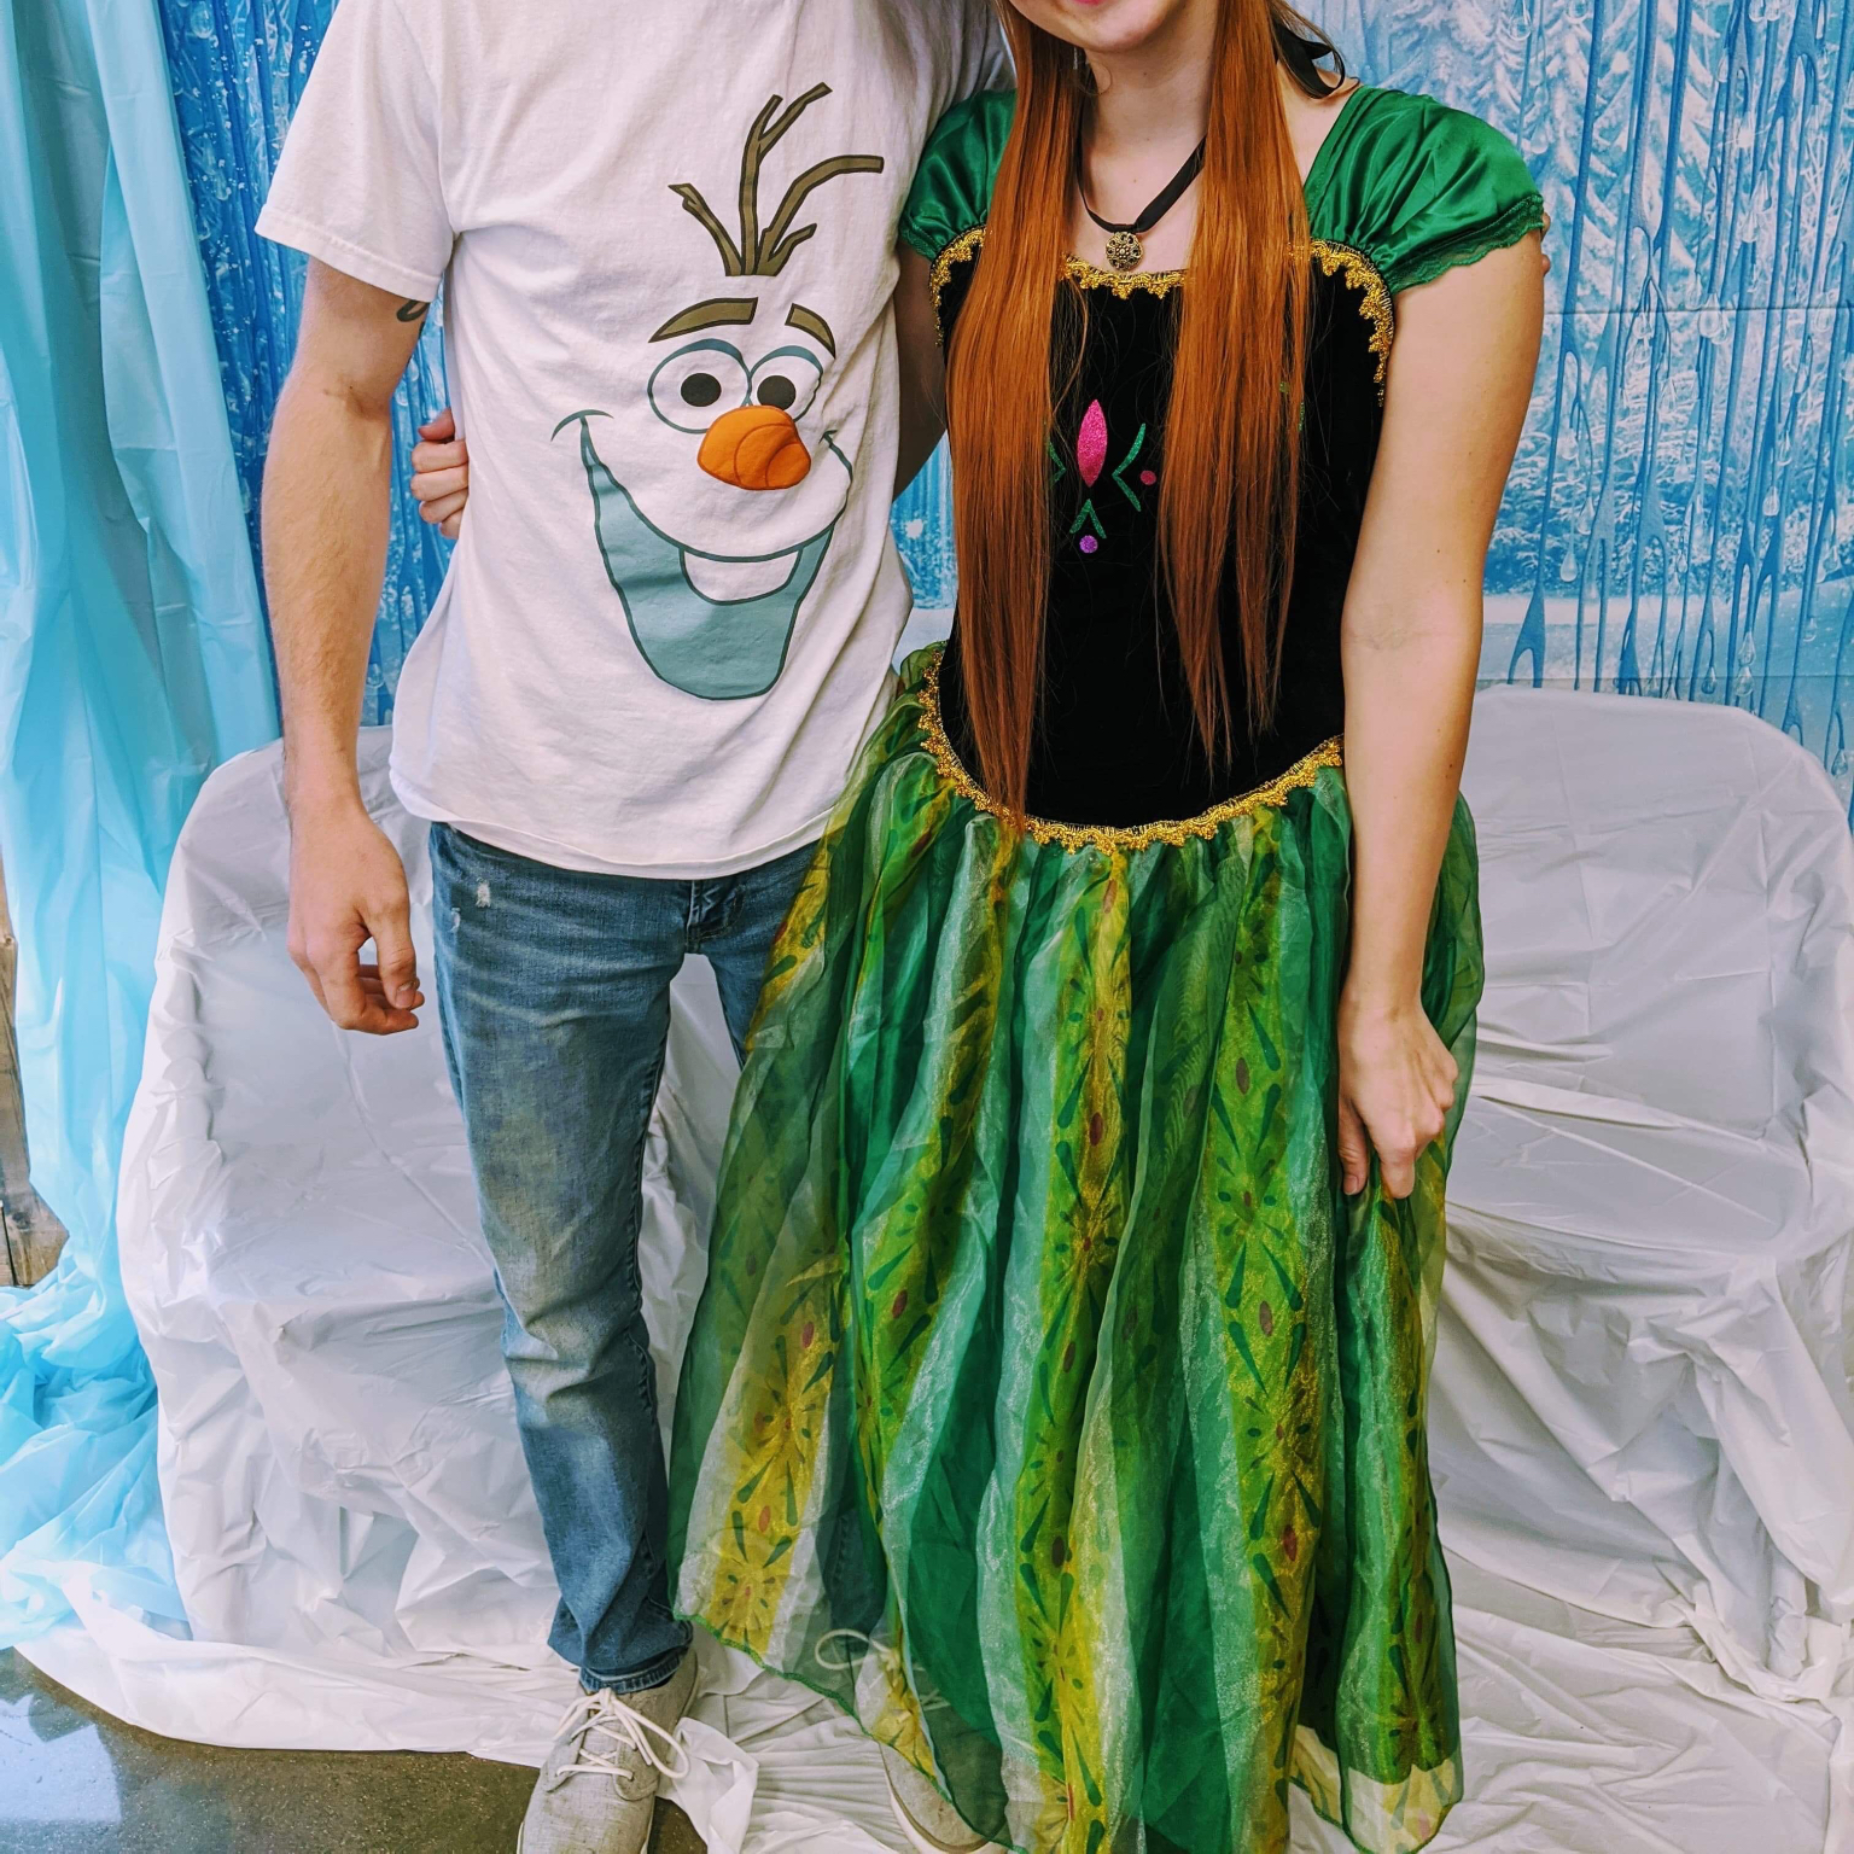 We are occasional volunteers for our local art club! This time we dressed up as Olaf and Ana and spent some time doing crafts and watching Frozen with kids in the local community. :)